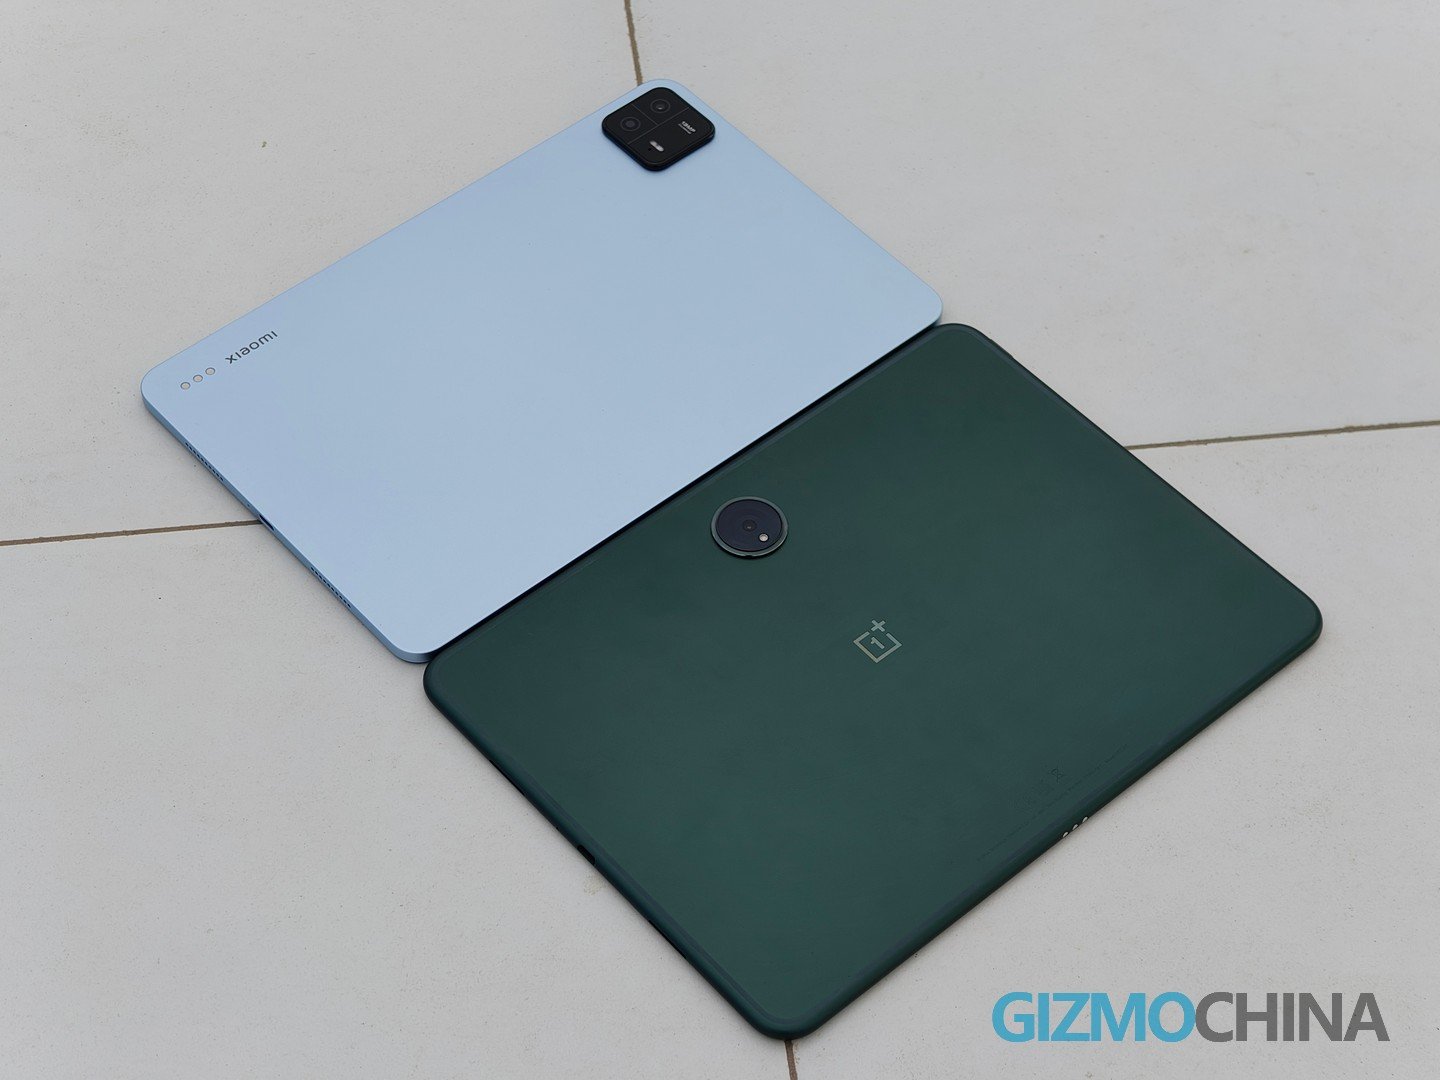 Xiaomi Pad 6 review: Should you buy it? - Android Authority